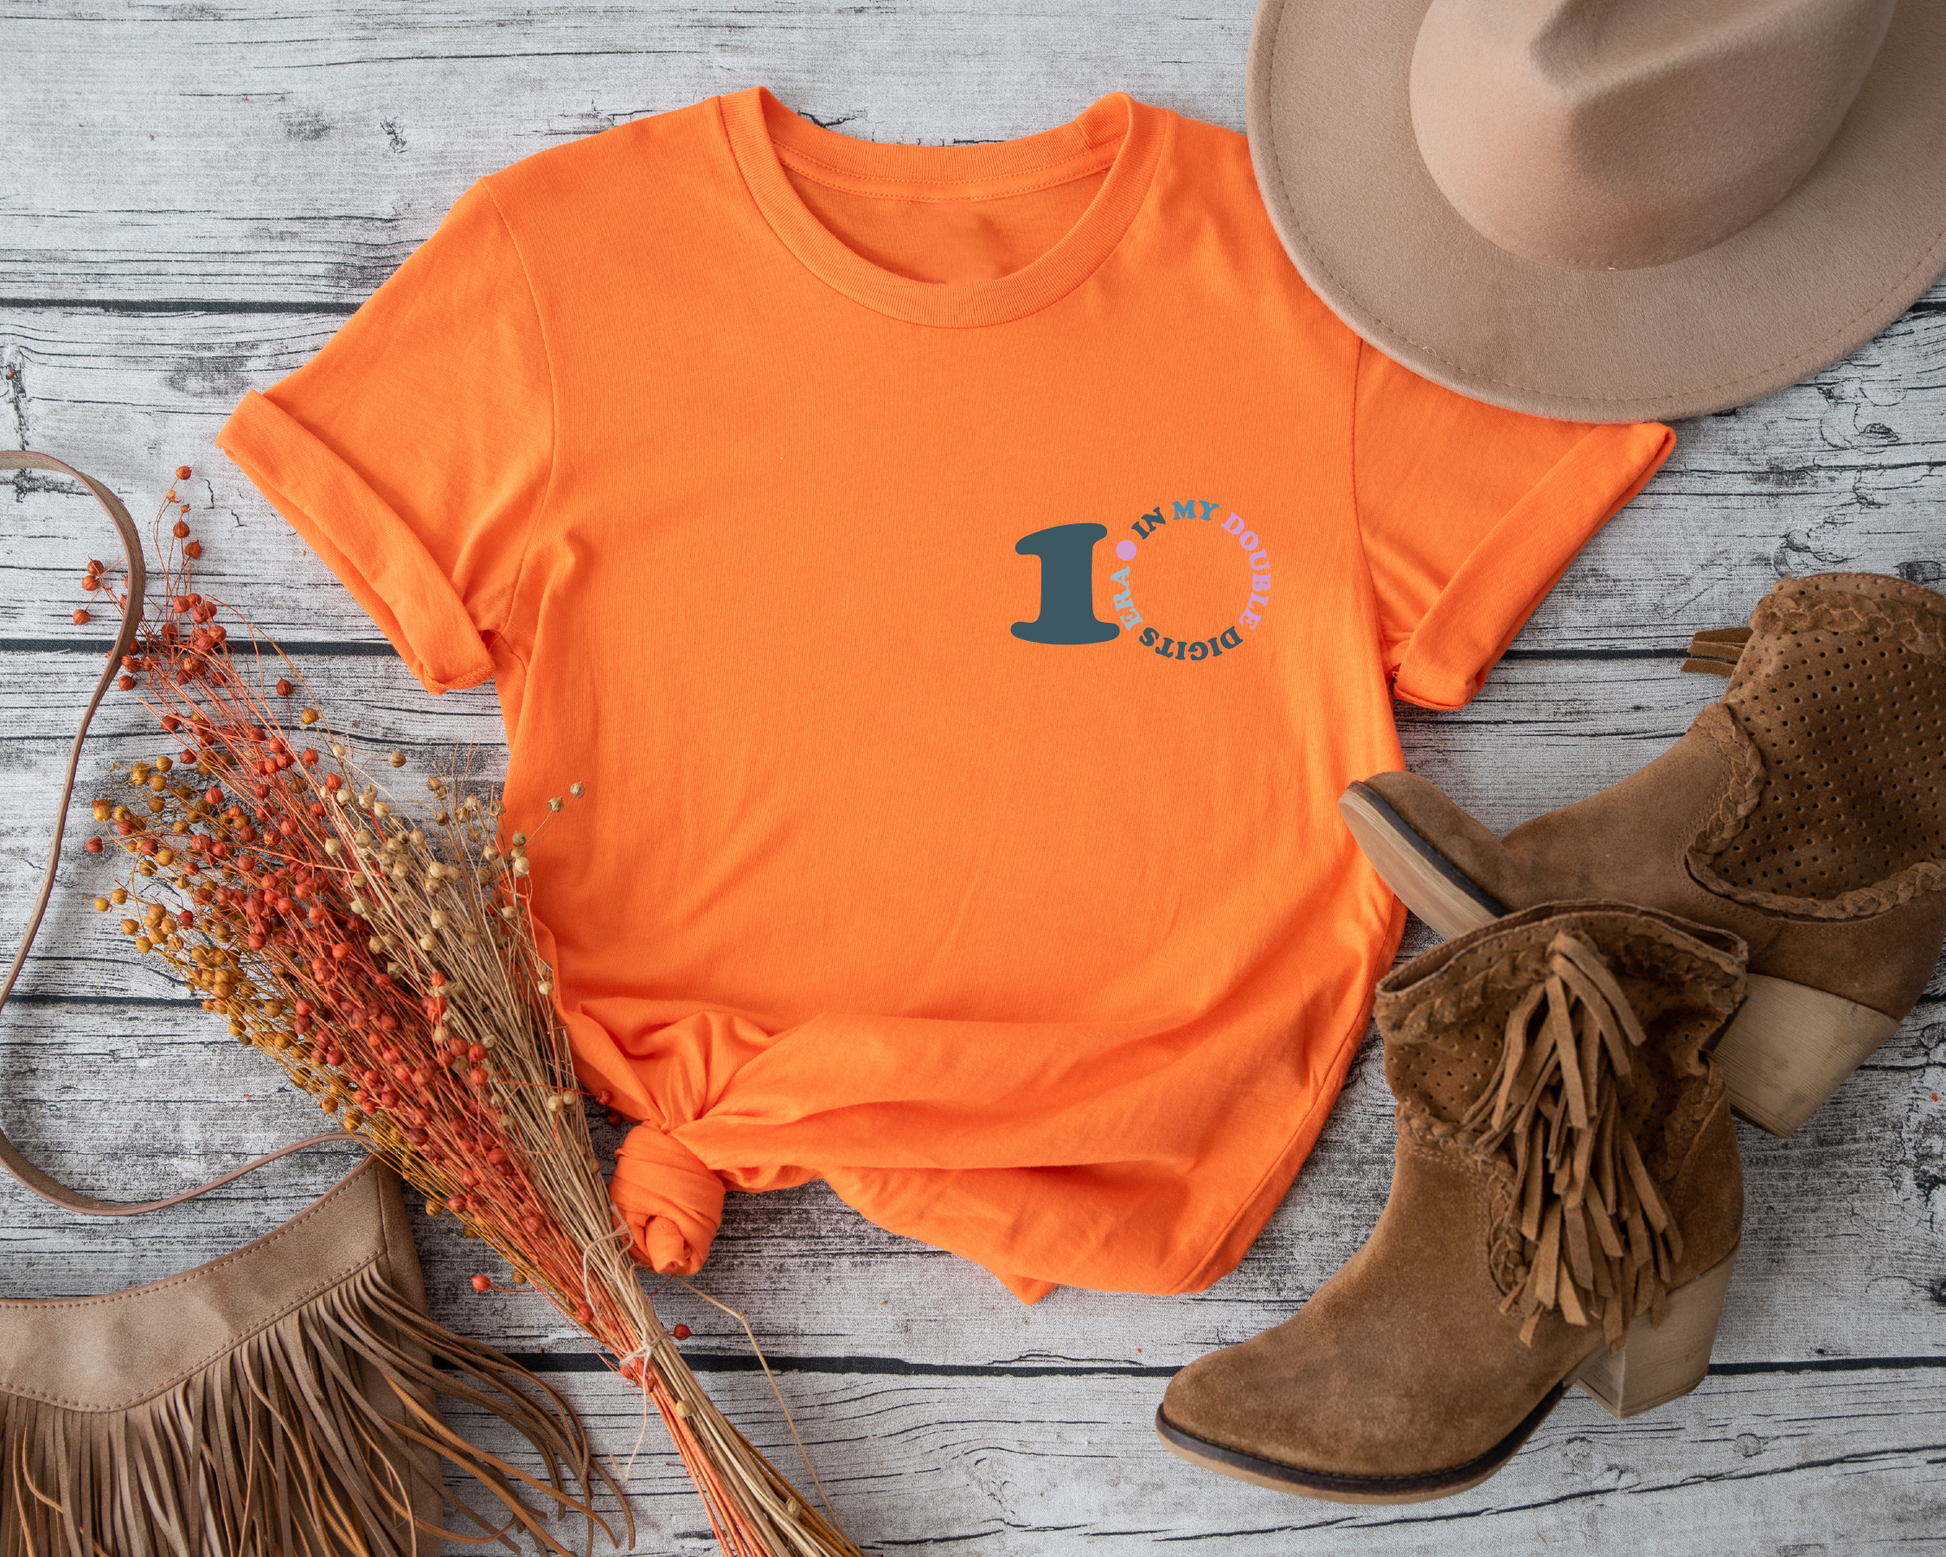 Mark your special milestone with this unique and eye-catching "In My Double Digits" shirt